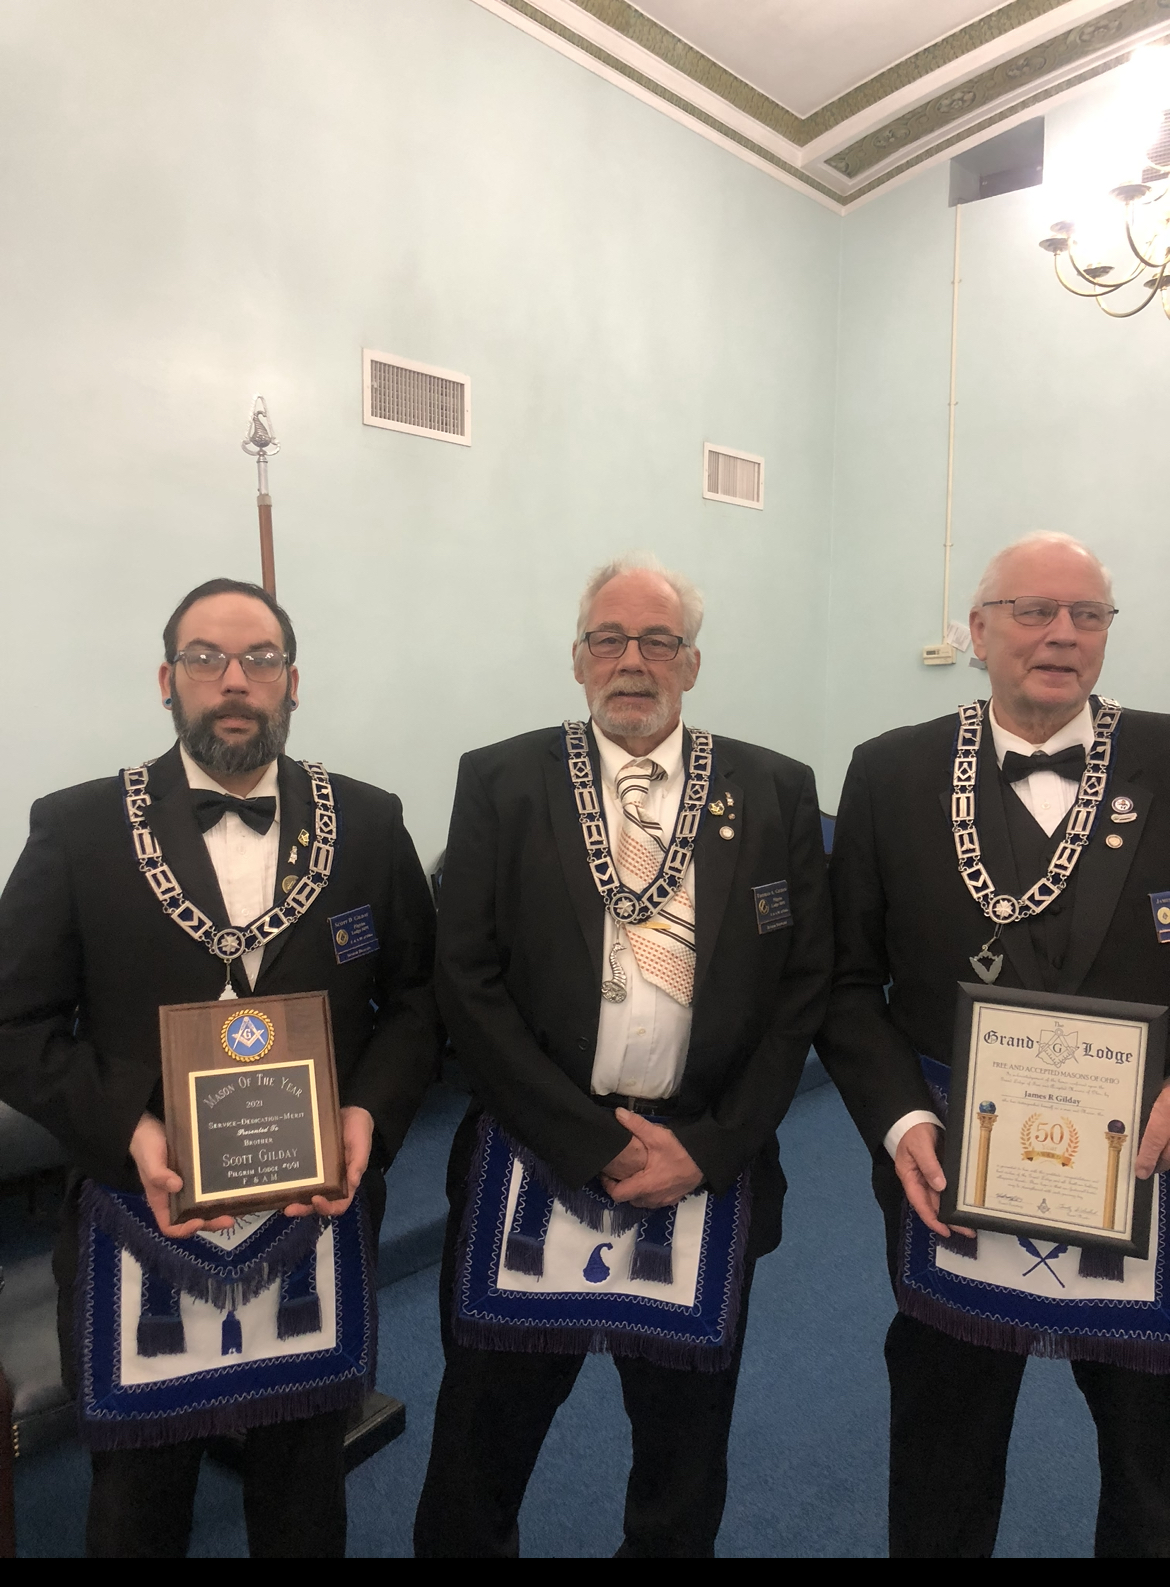 An image of Ohio Masons from Pilgrim Lodge #691 in their aprons.